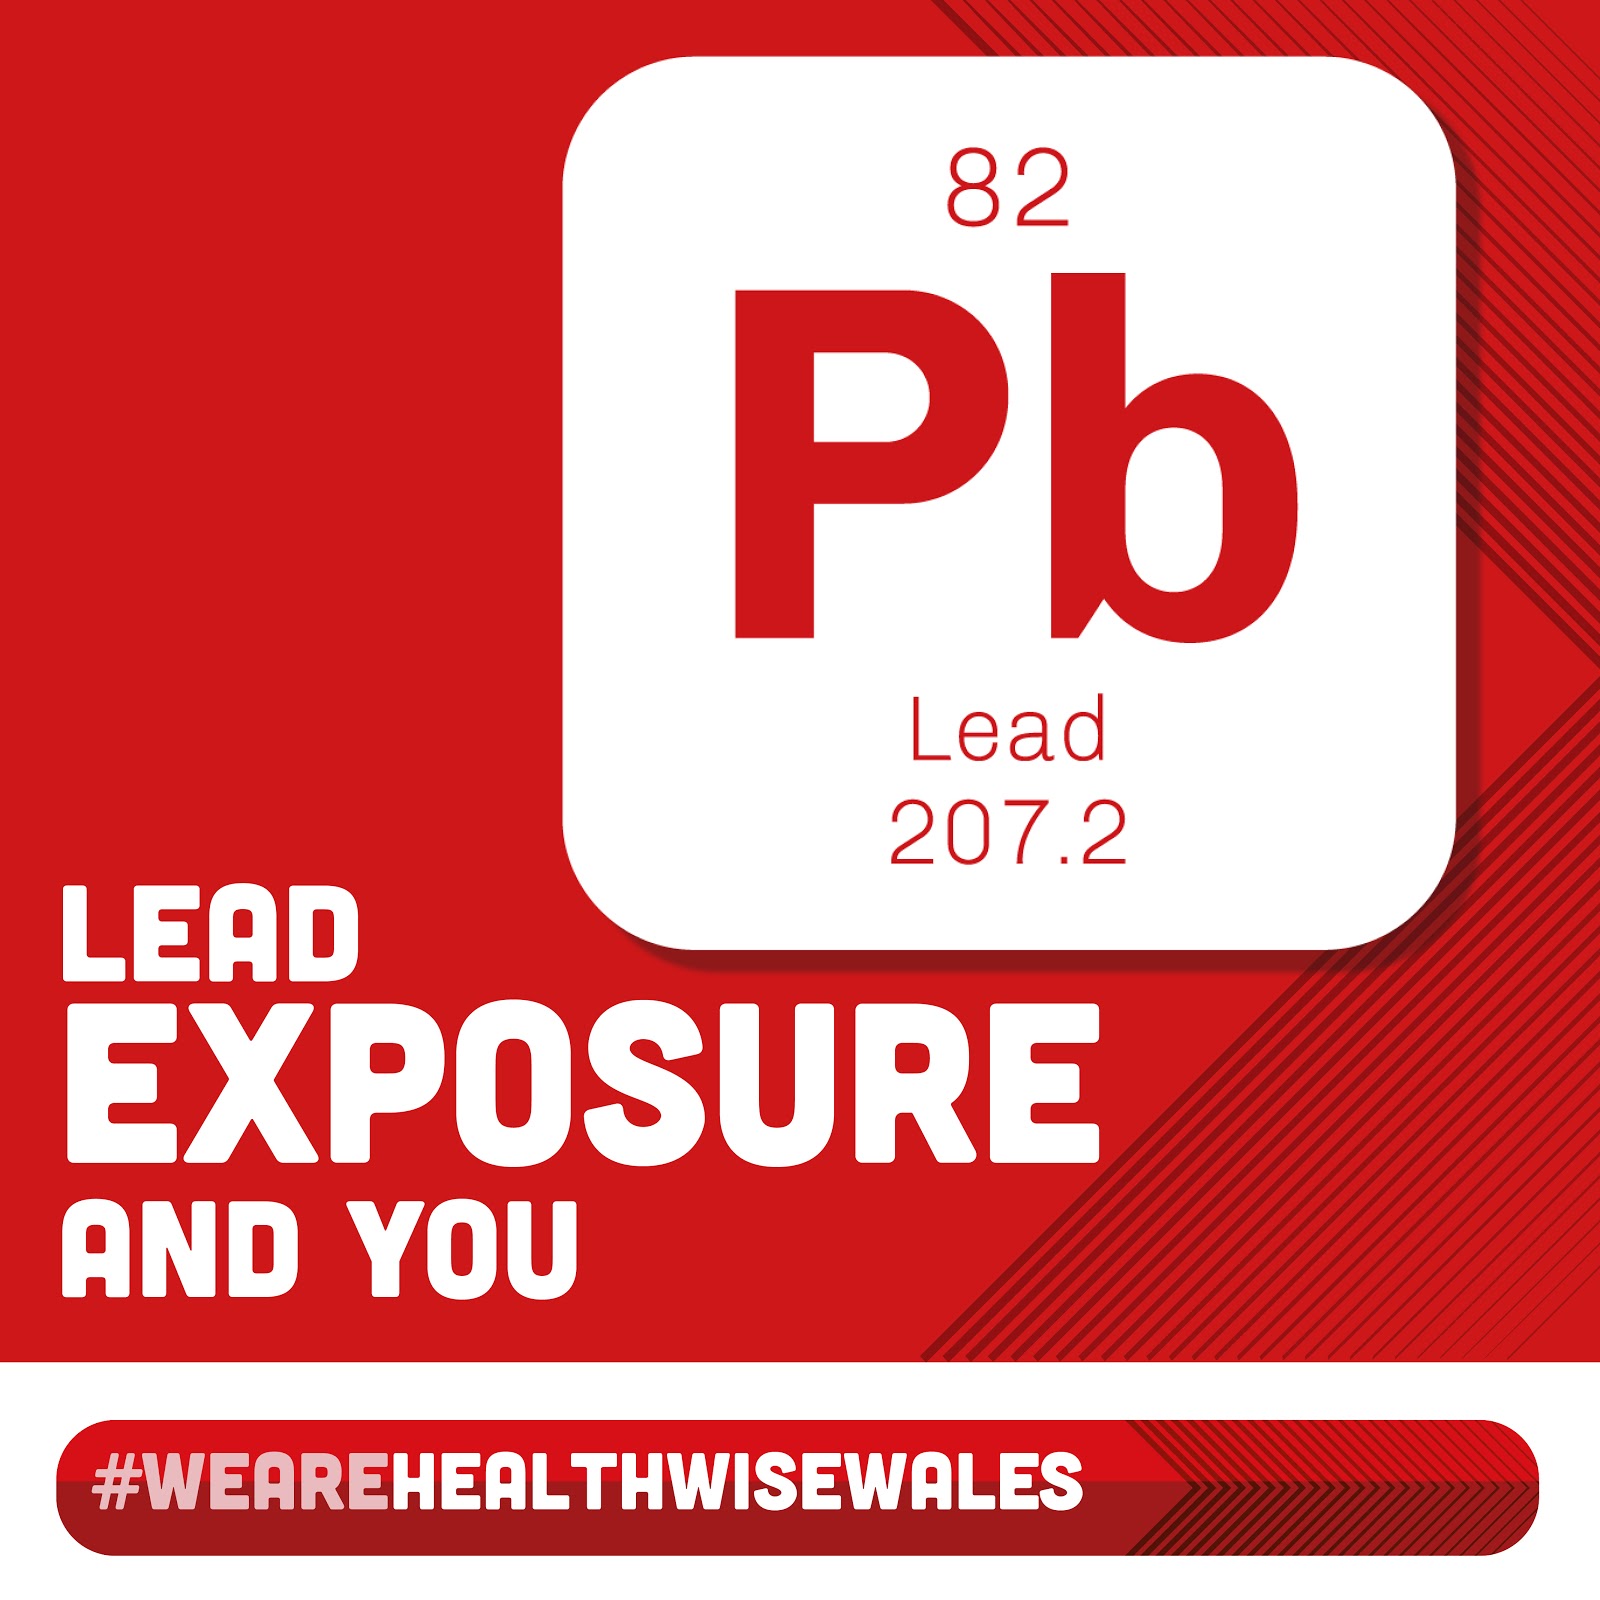 Lead Exposure in your life? Here's our Q & A with Public Health Wales